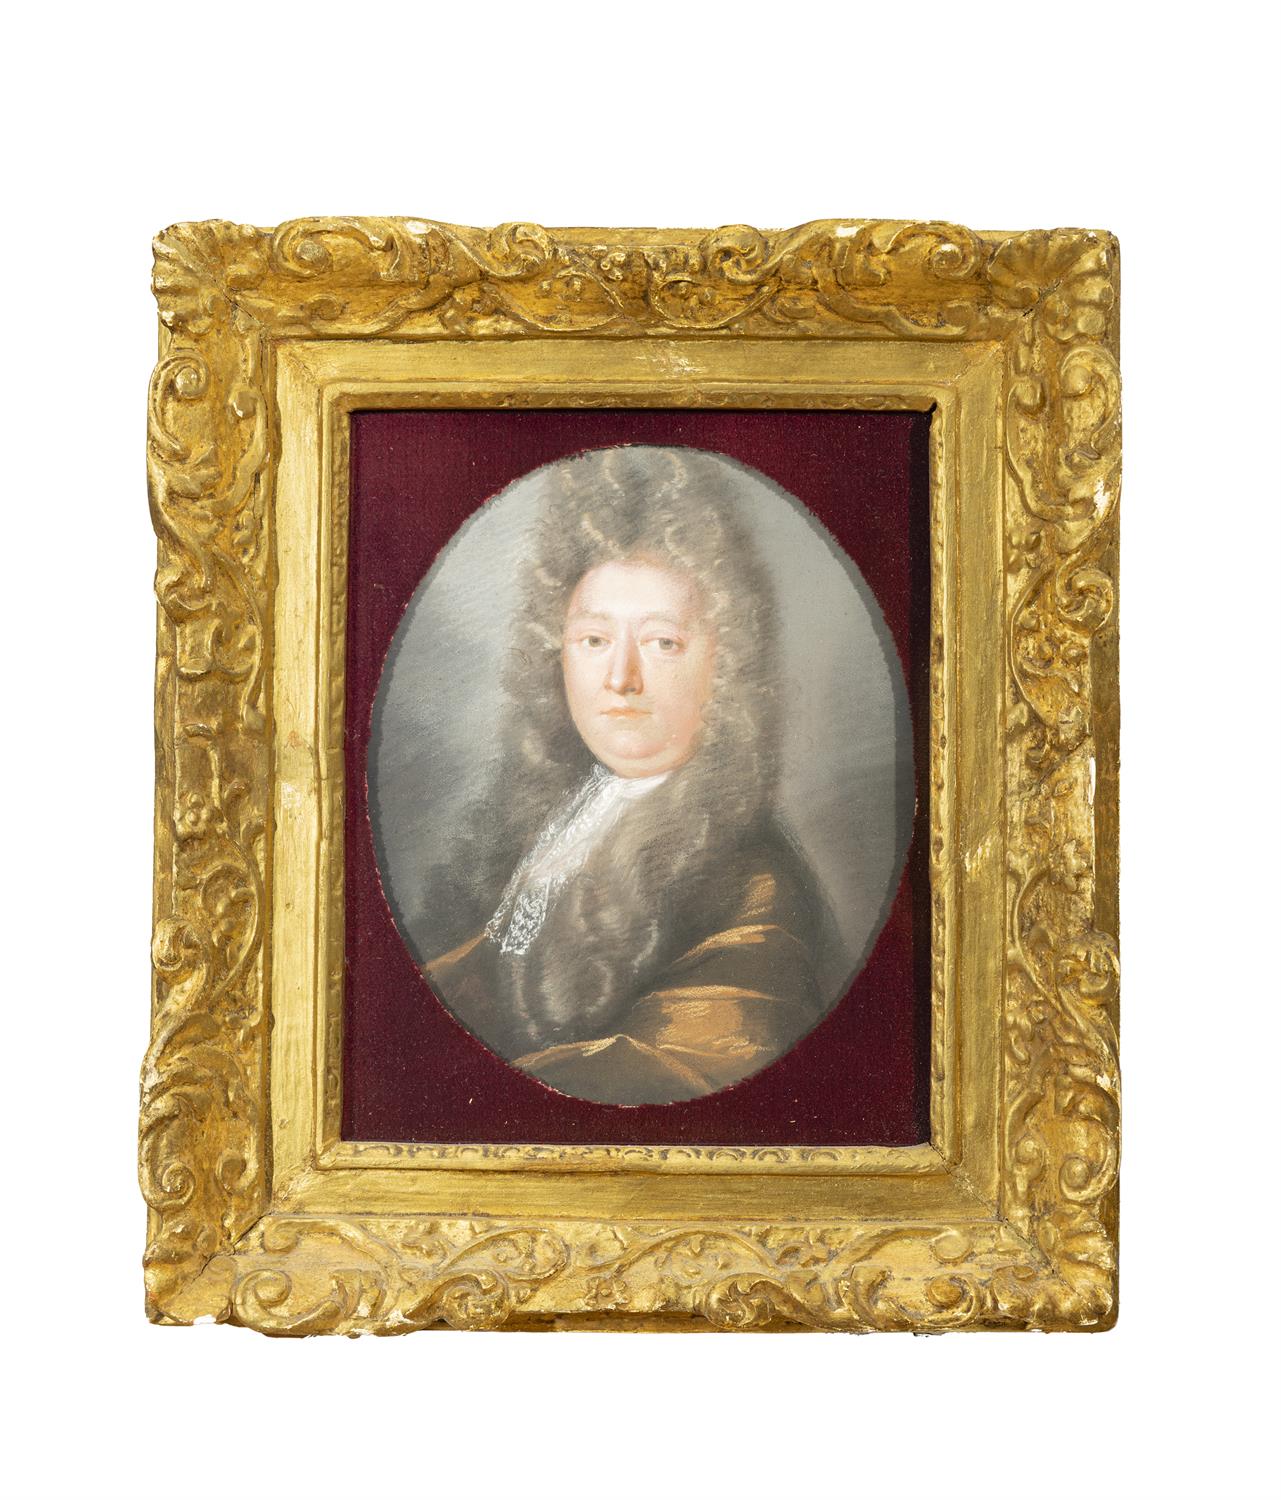 EDWARD LUTTRELL (c.1650-1710) Portrait of a Wigged Gentleman, half-length, wearing brown robes and